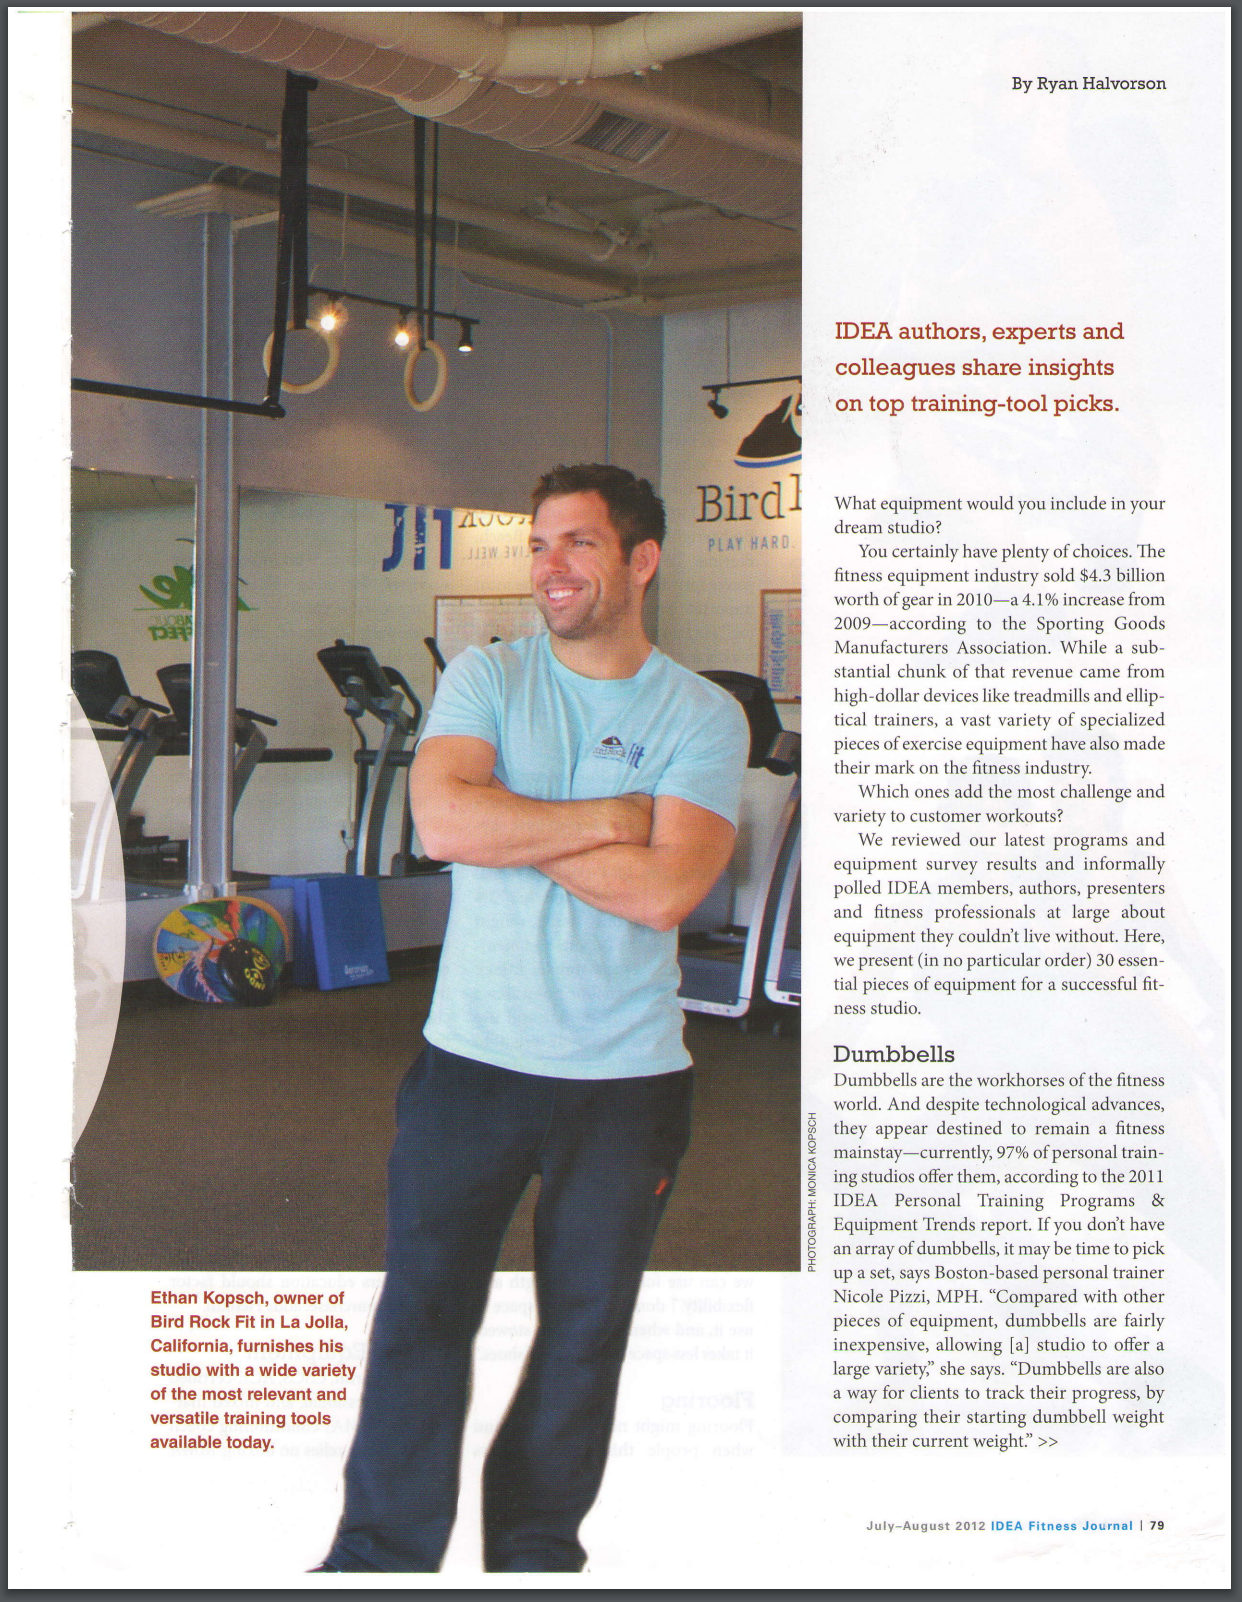 IDEA FITNESS JOURNAL, JULY 2012: 30 Essential Pieces of Equipment for a Successful Training Studio